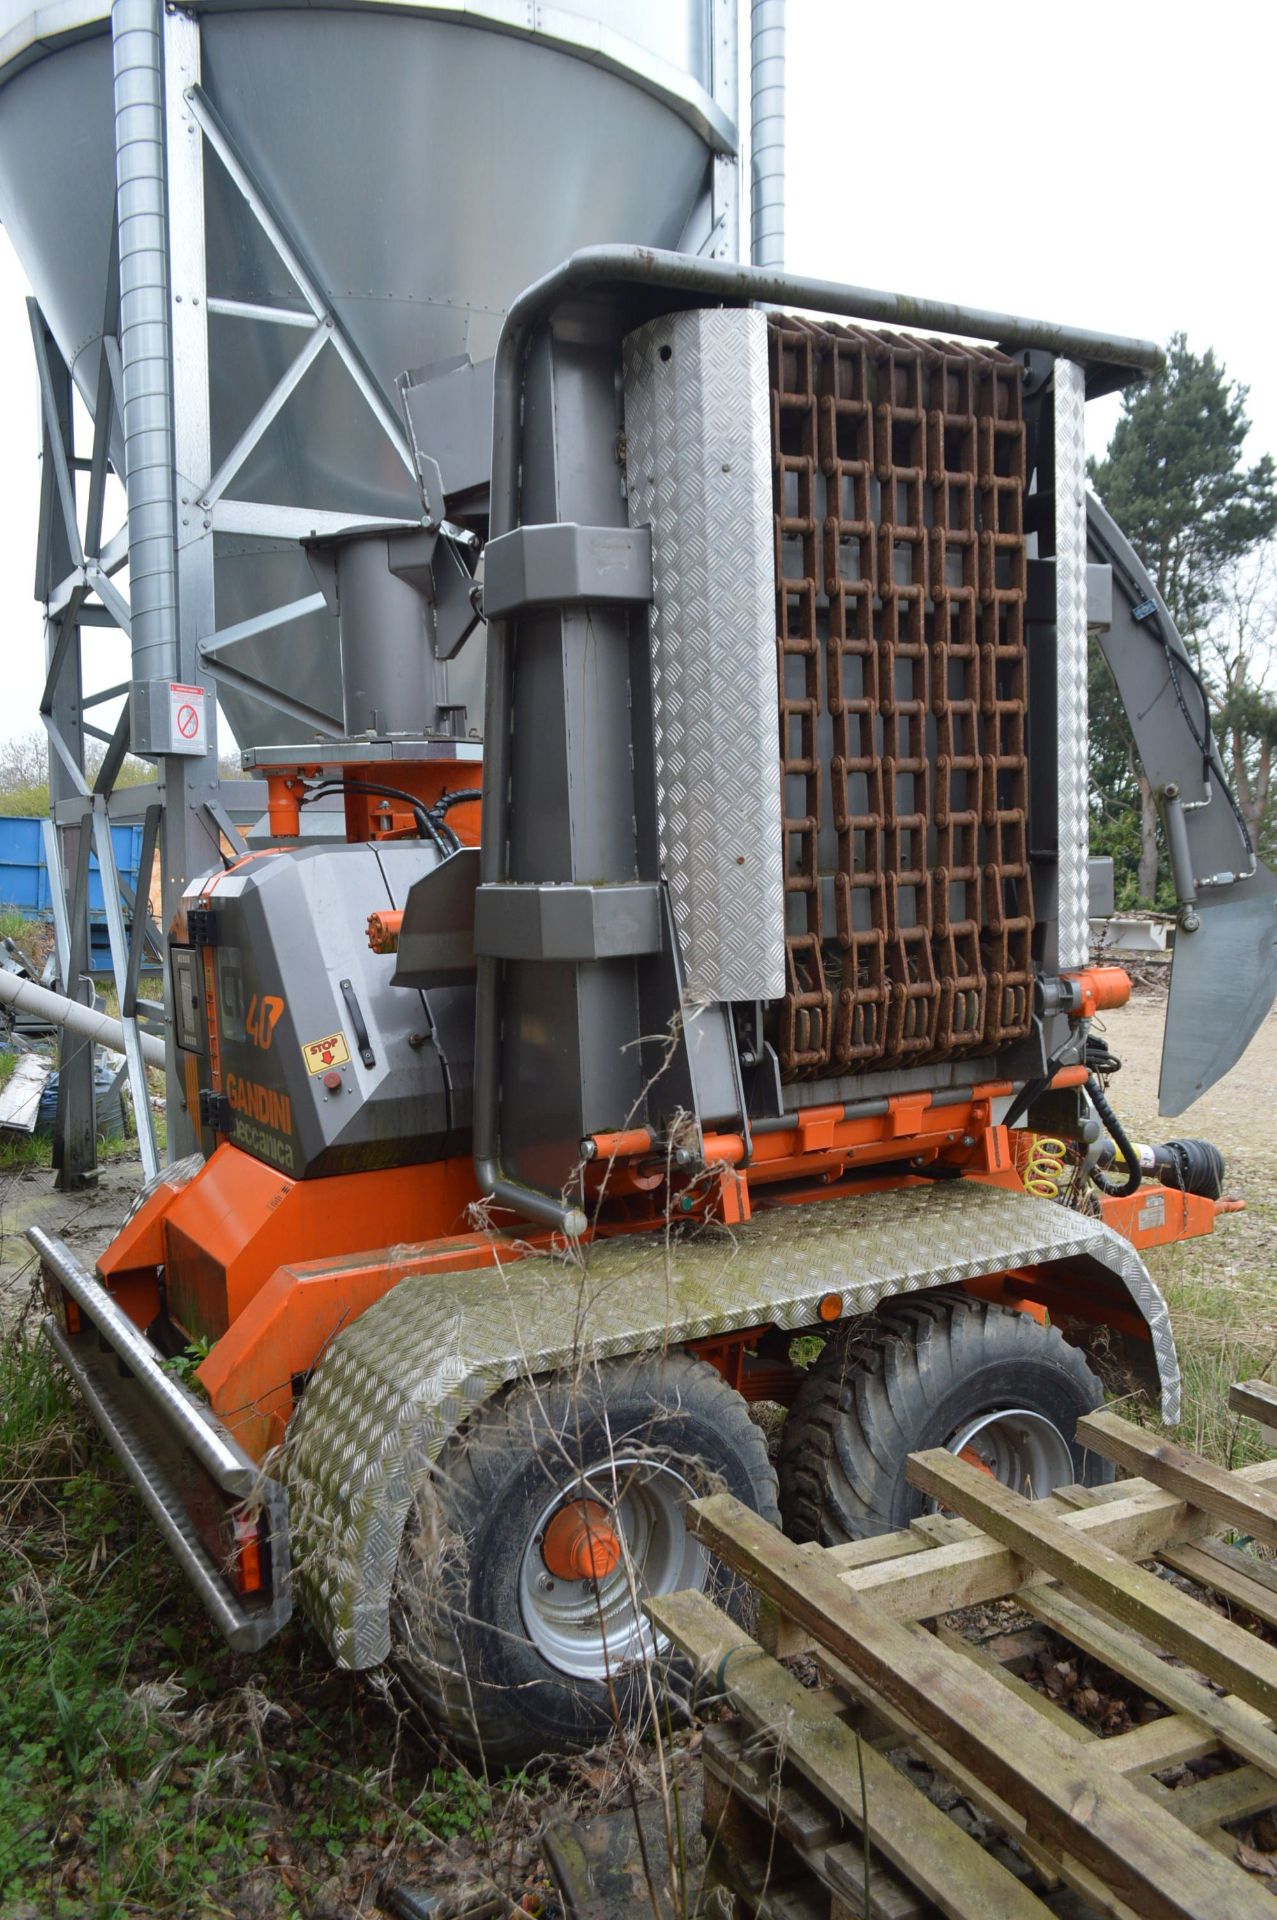 Gandini Meccanica CT40/75TTS MOBILE WOOD CHIPPER, serial no. CT40453, year of manufacture 2014, with - Image 5 of 11